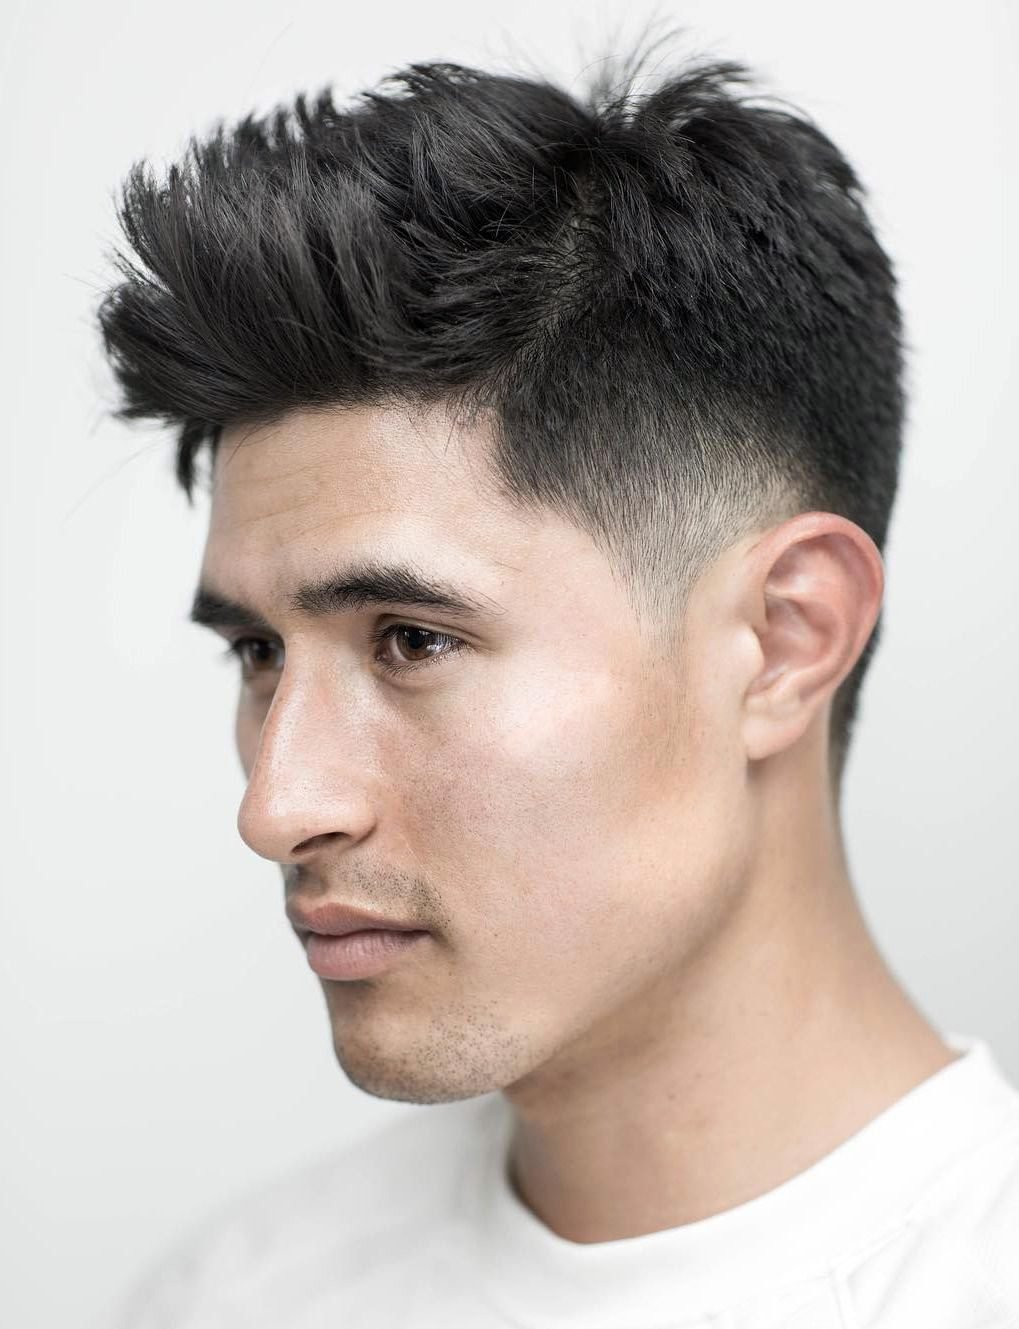 80 Men Hairstyles For Round Face-Neat Brush Up with Tapered Sides